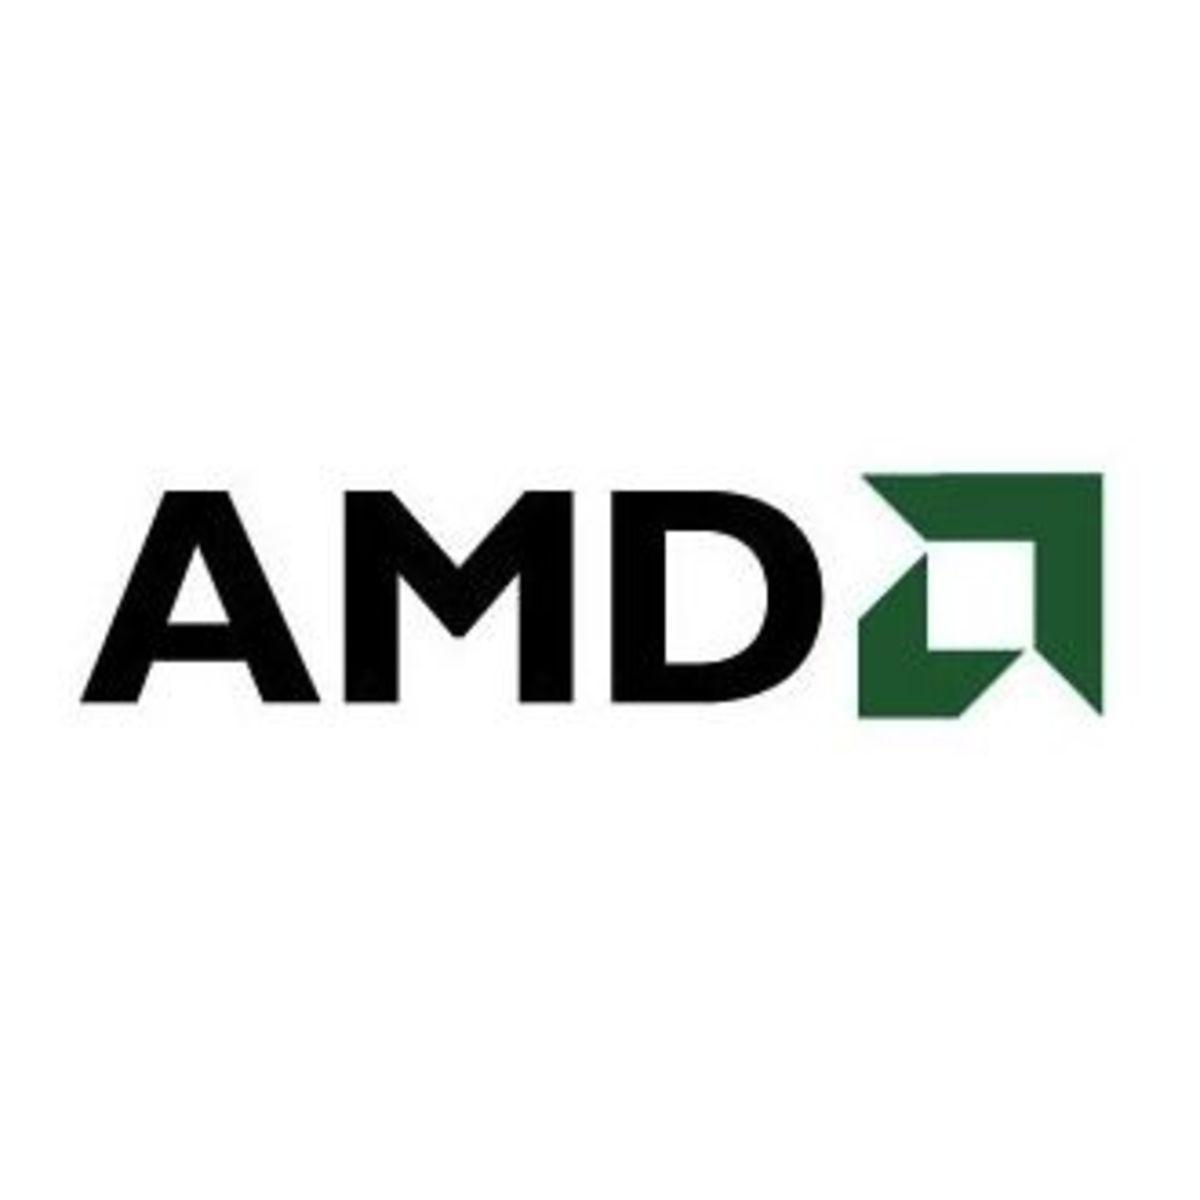 Green AMD Logo - AMD reports losses, will axe 15% of workforce - PC Retail